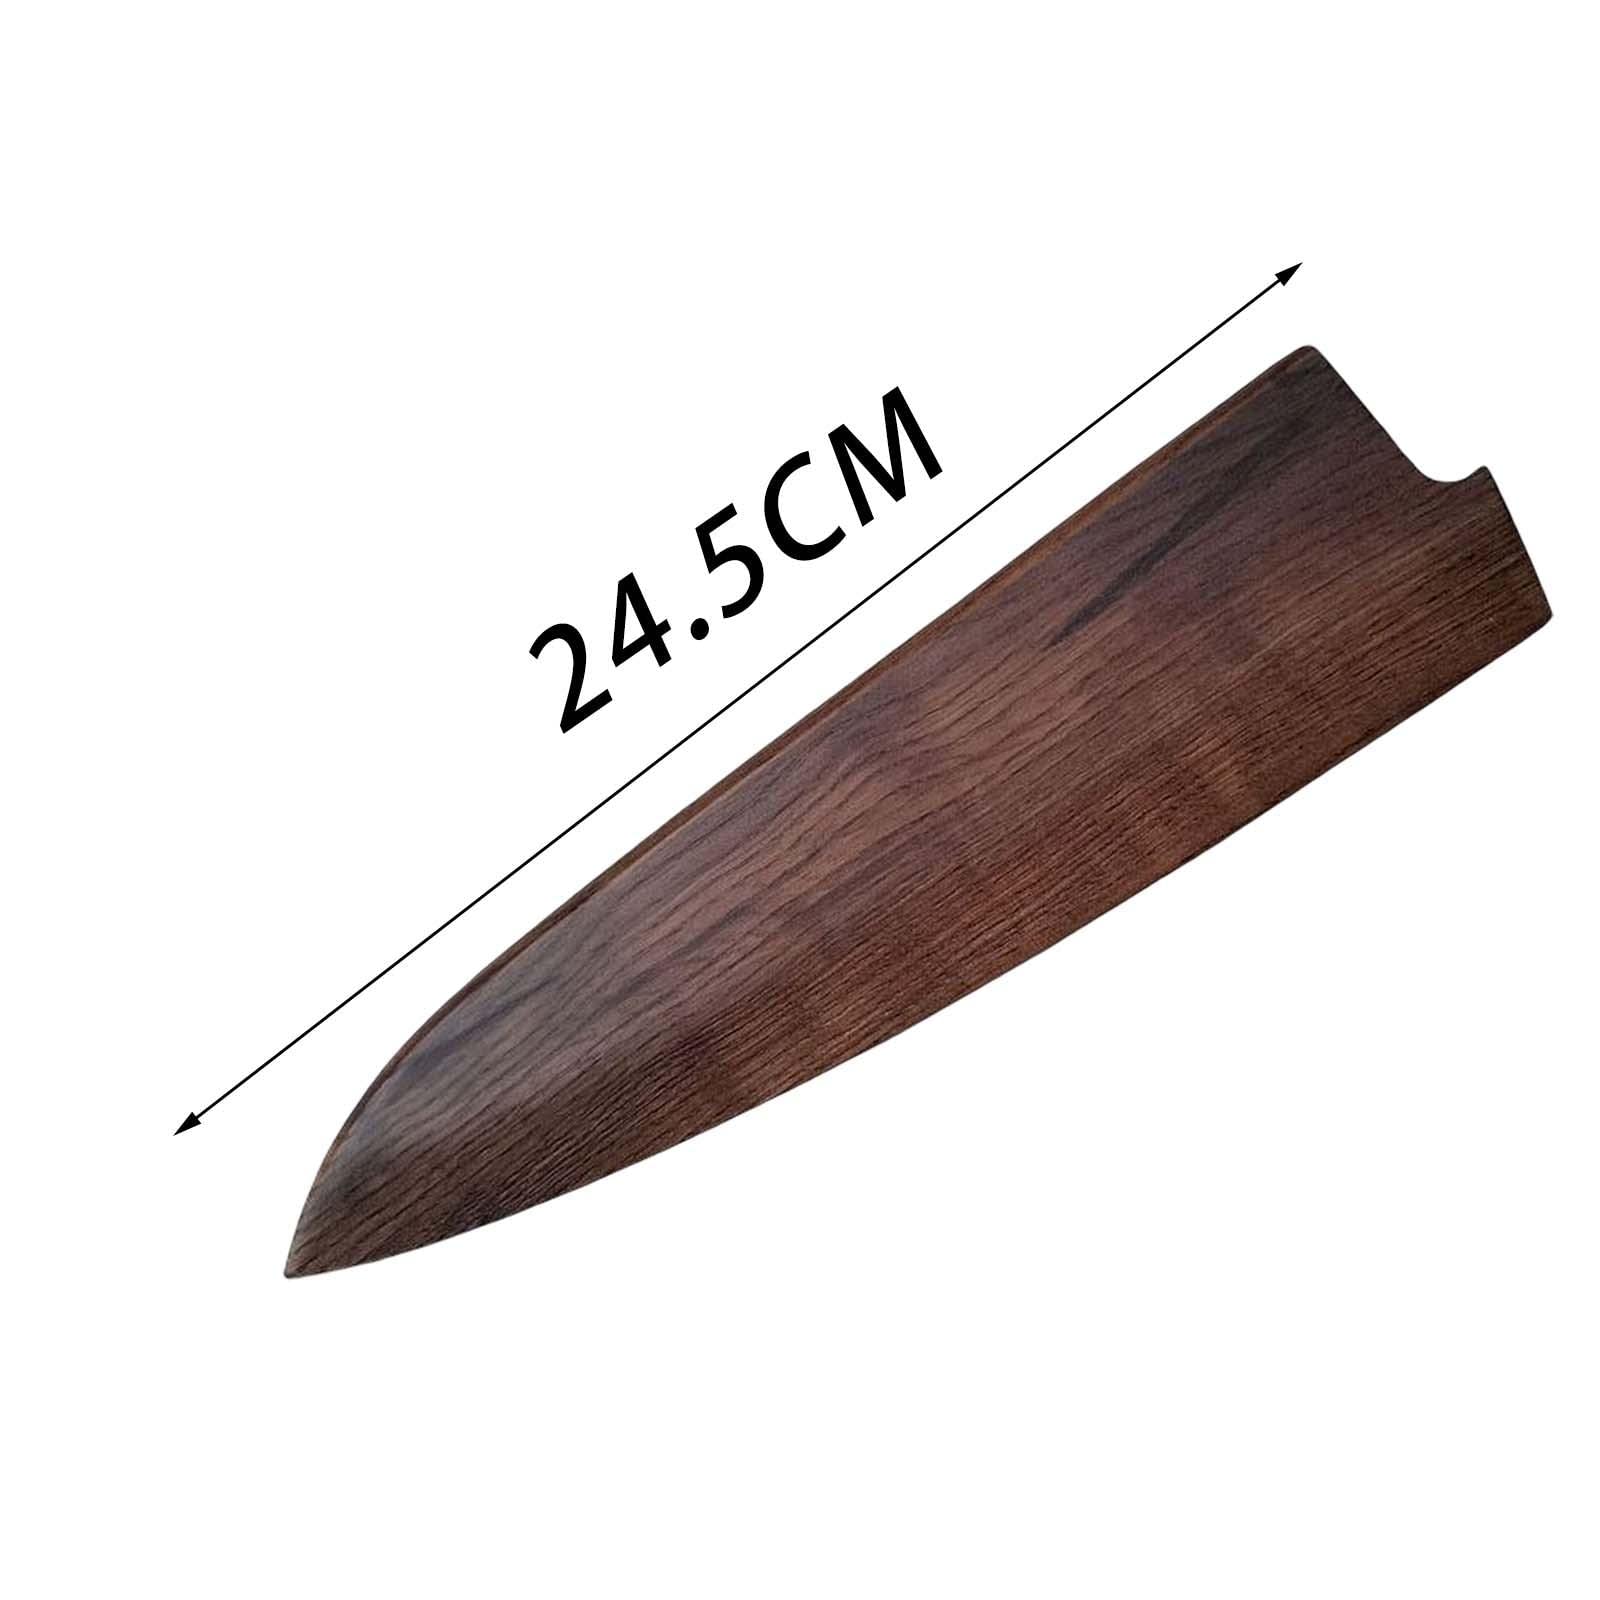 Knife Scabbard Knife Wooden Cover Cutter Cover Pocket Holder Convenient Sheath Classical Wear Resistant Bag for Kitchen Hunting, 210mm